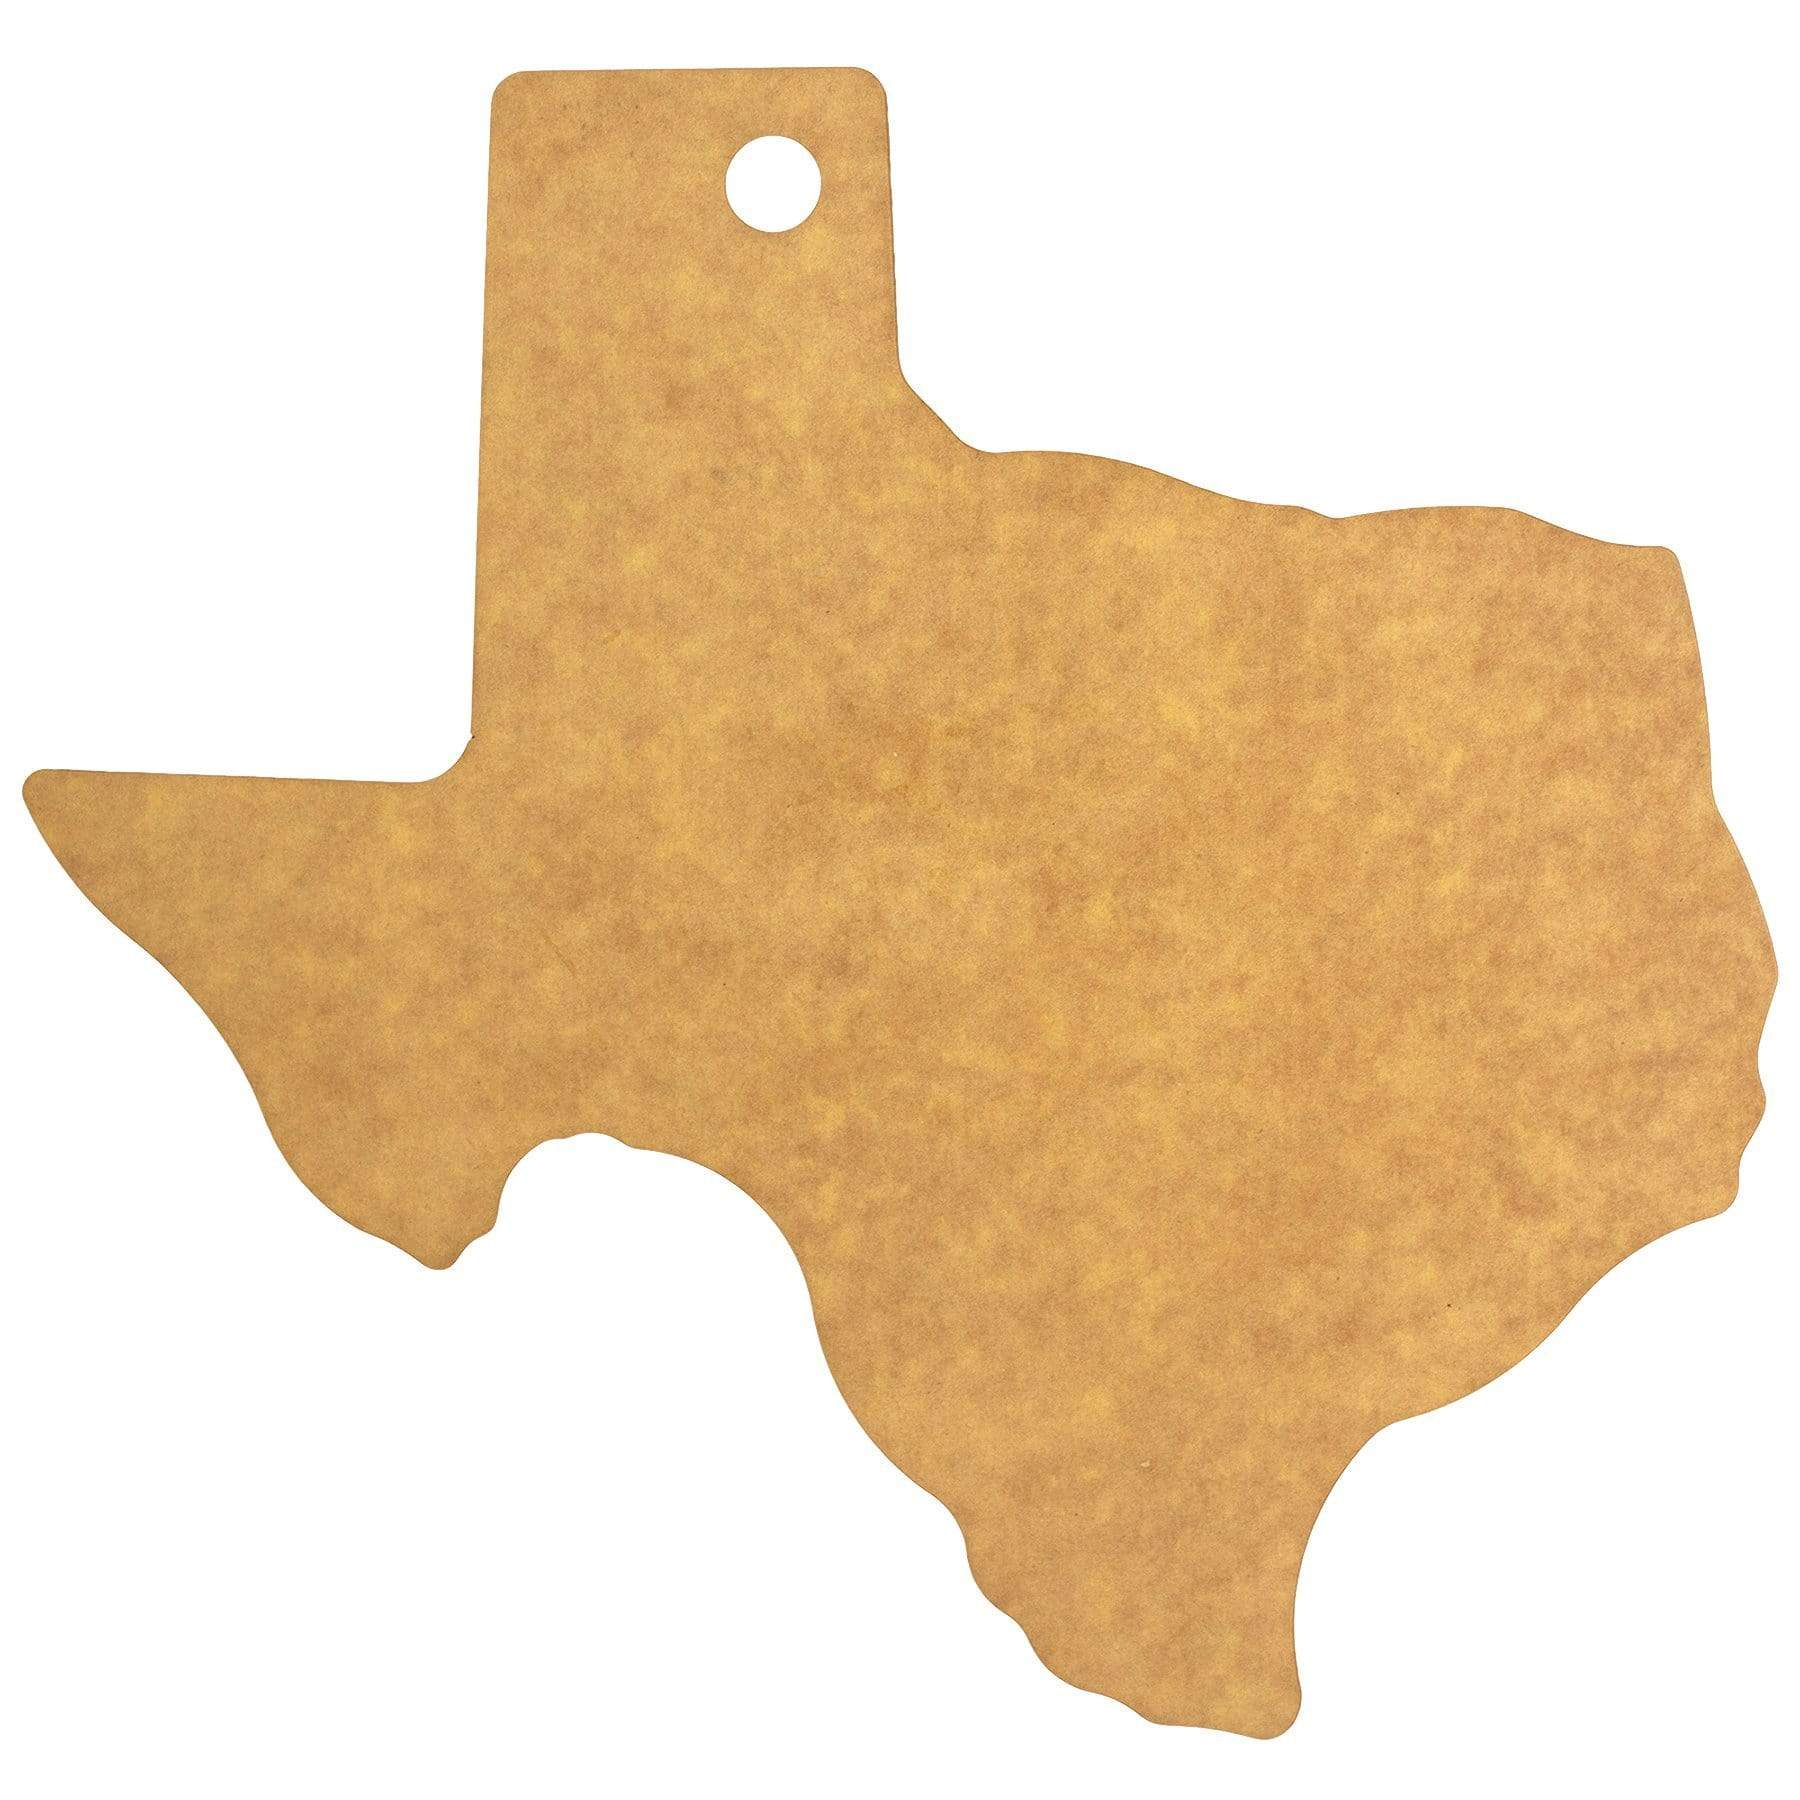 https://totallybamboo.com/cdn/shop/products/vellum-texas-shaped-wood-paper-composite-serving-and-cutting-board-13-14-x-13-dishwasher-safe-totally-bamboo-234016.jpg?v=1627394557